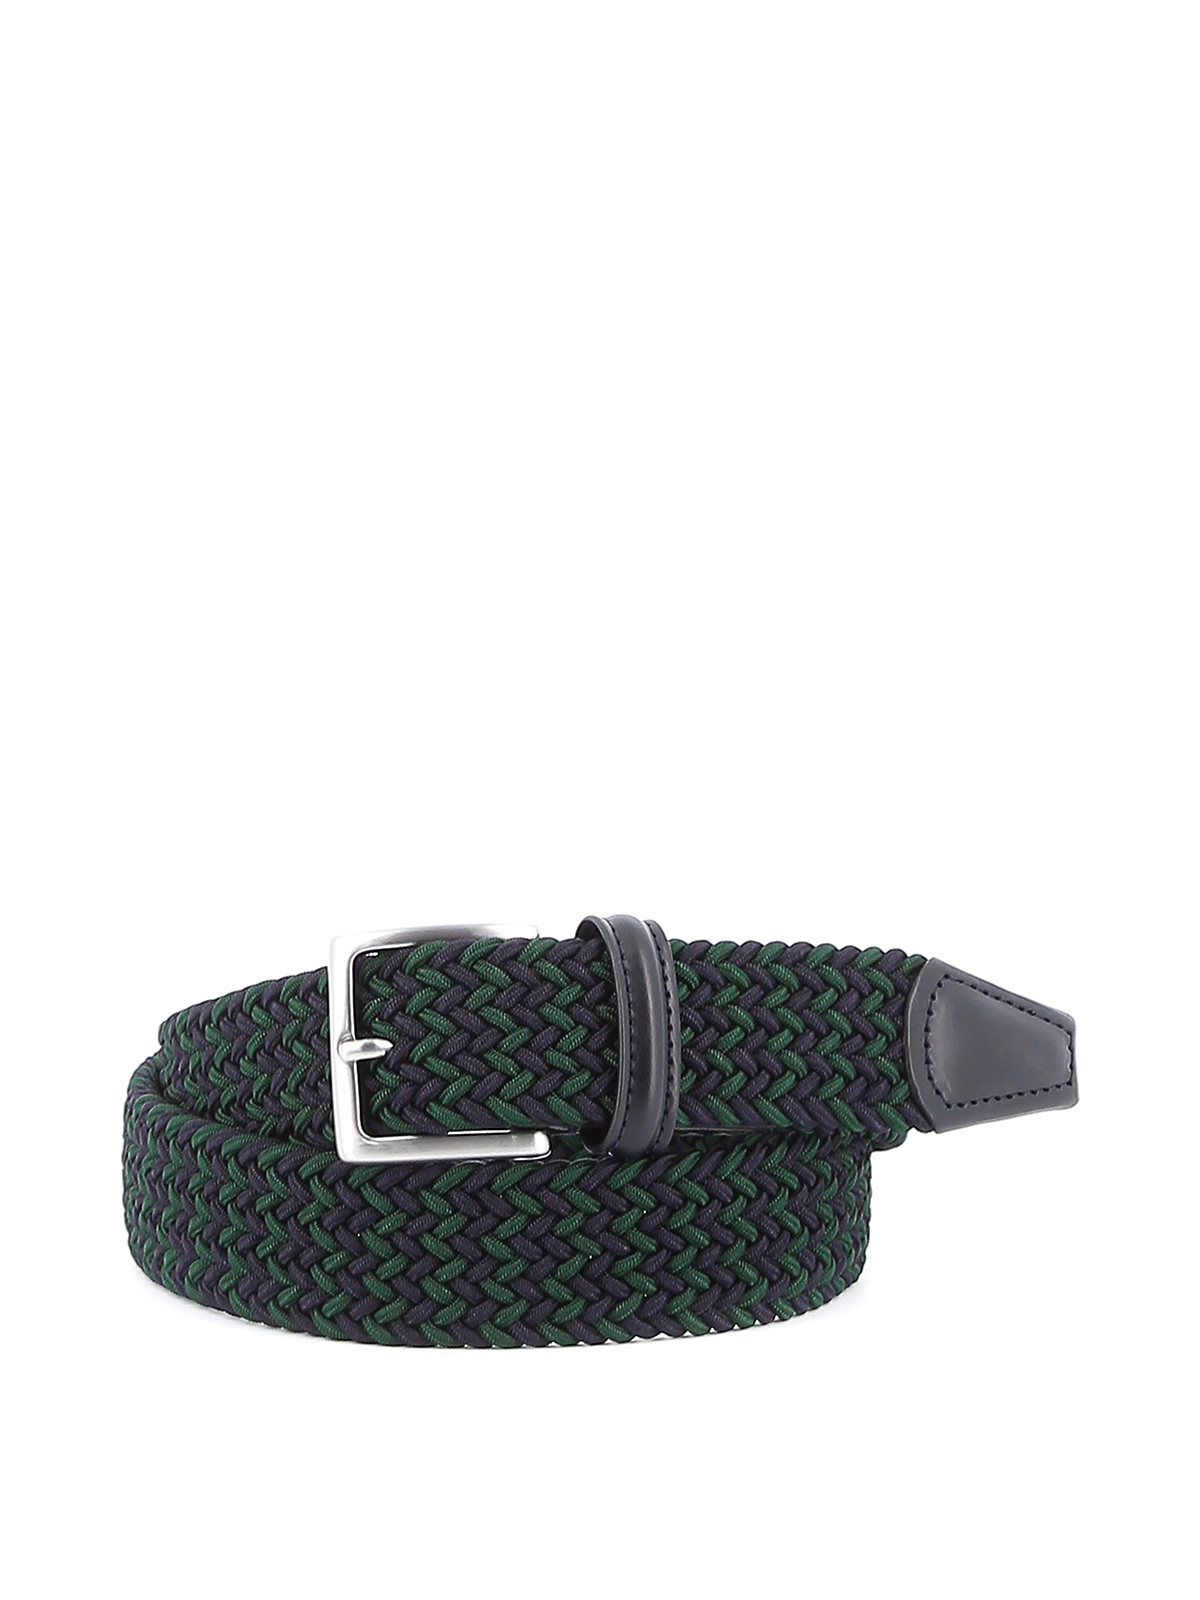 ANDERSON'S BLUE AND GREEN STRETCH WOVEN FABRIC BELT